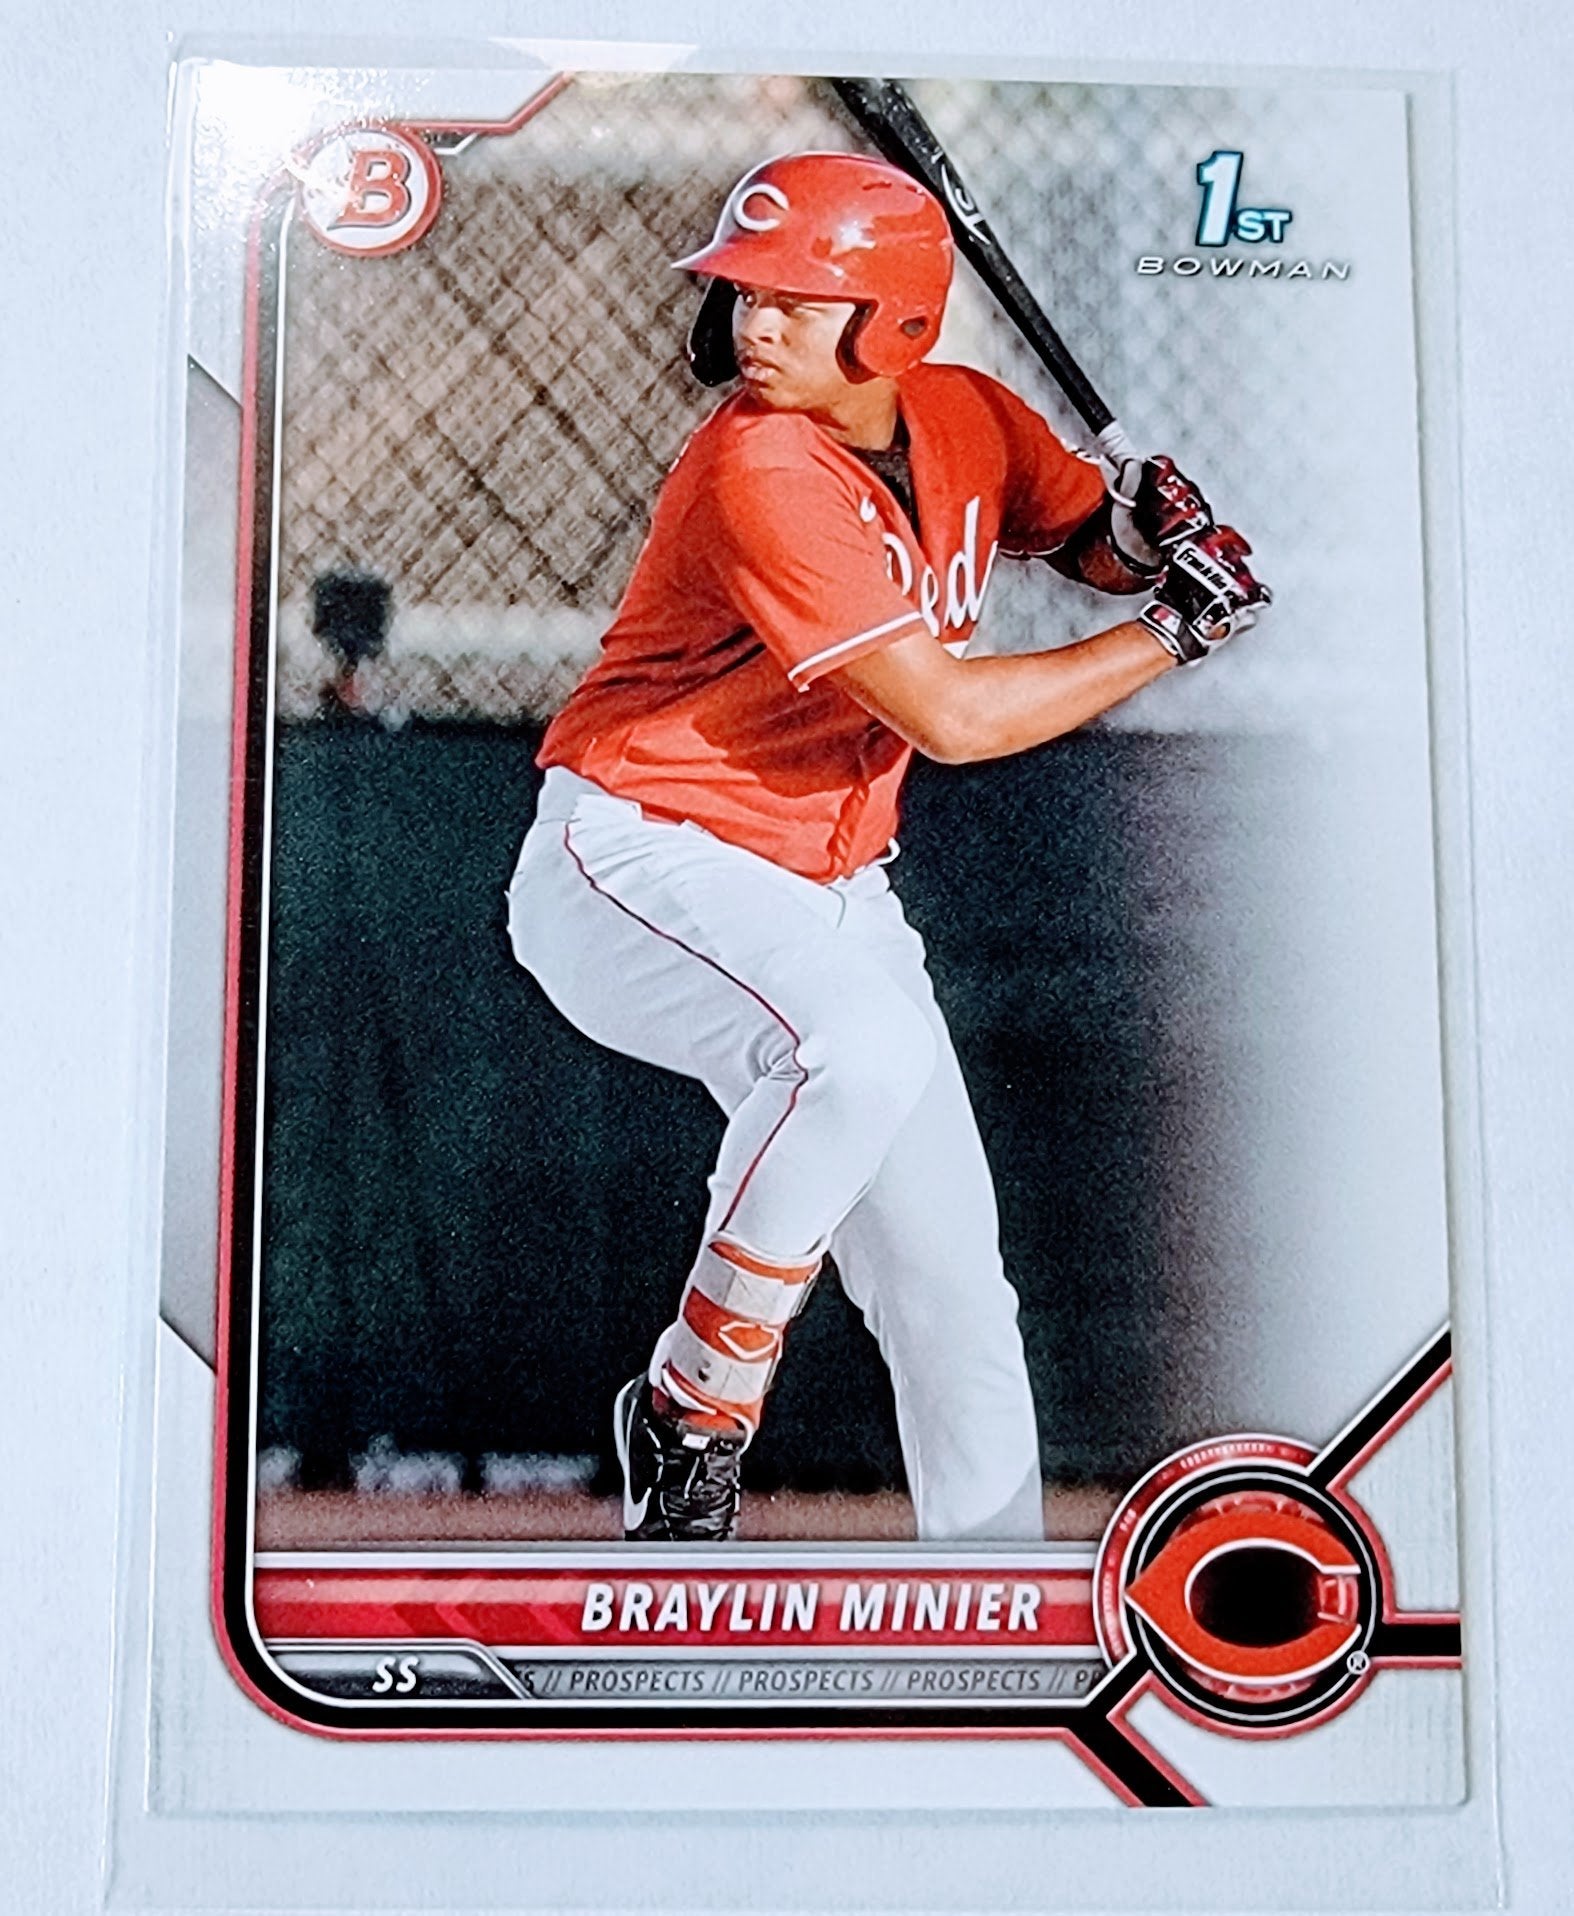 2022 Bowman Braylin Minter 1st on Bowman Baseball Trading Card SMCB1 simple Xclusive Collectibles   